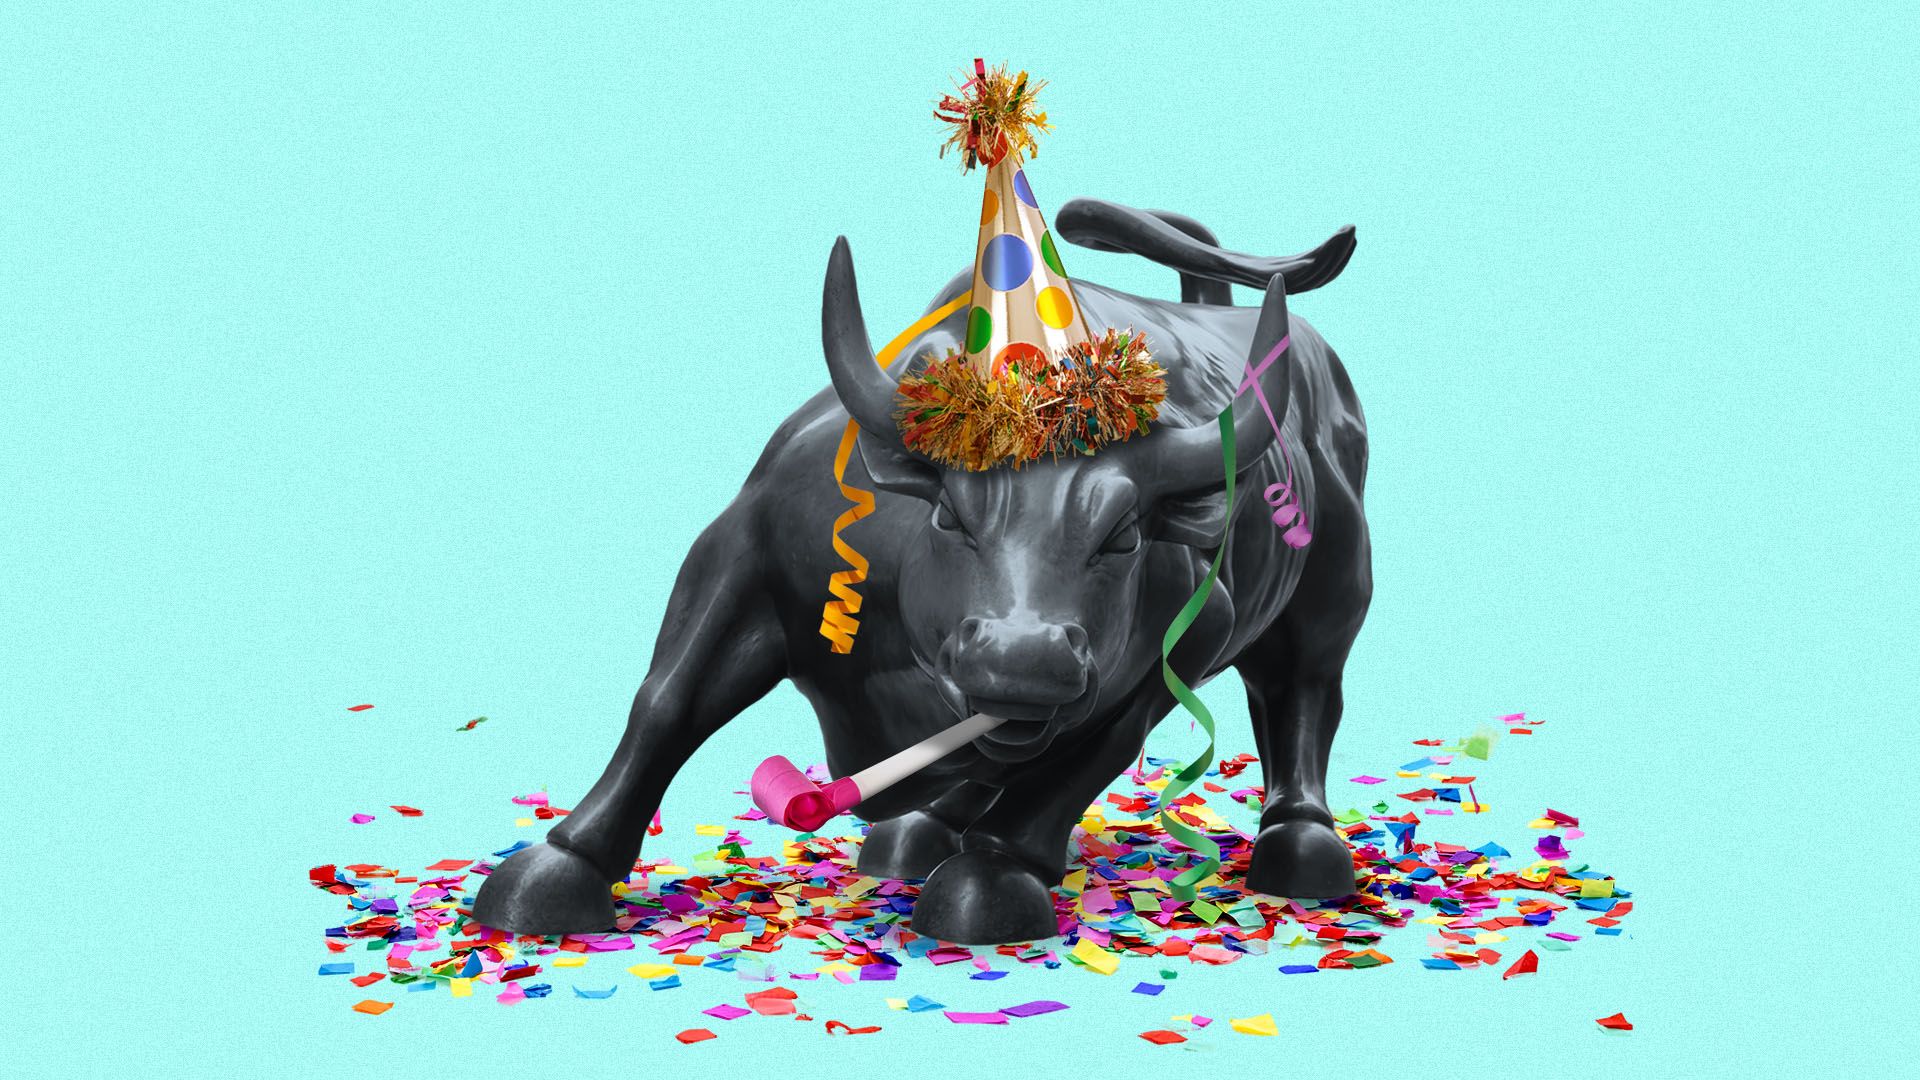 Illustration of the Wall Street bull wearing a party hat and covered in streamers and confetti.